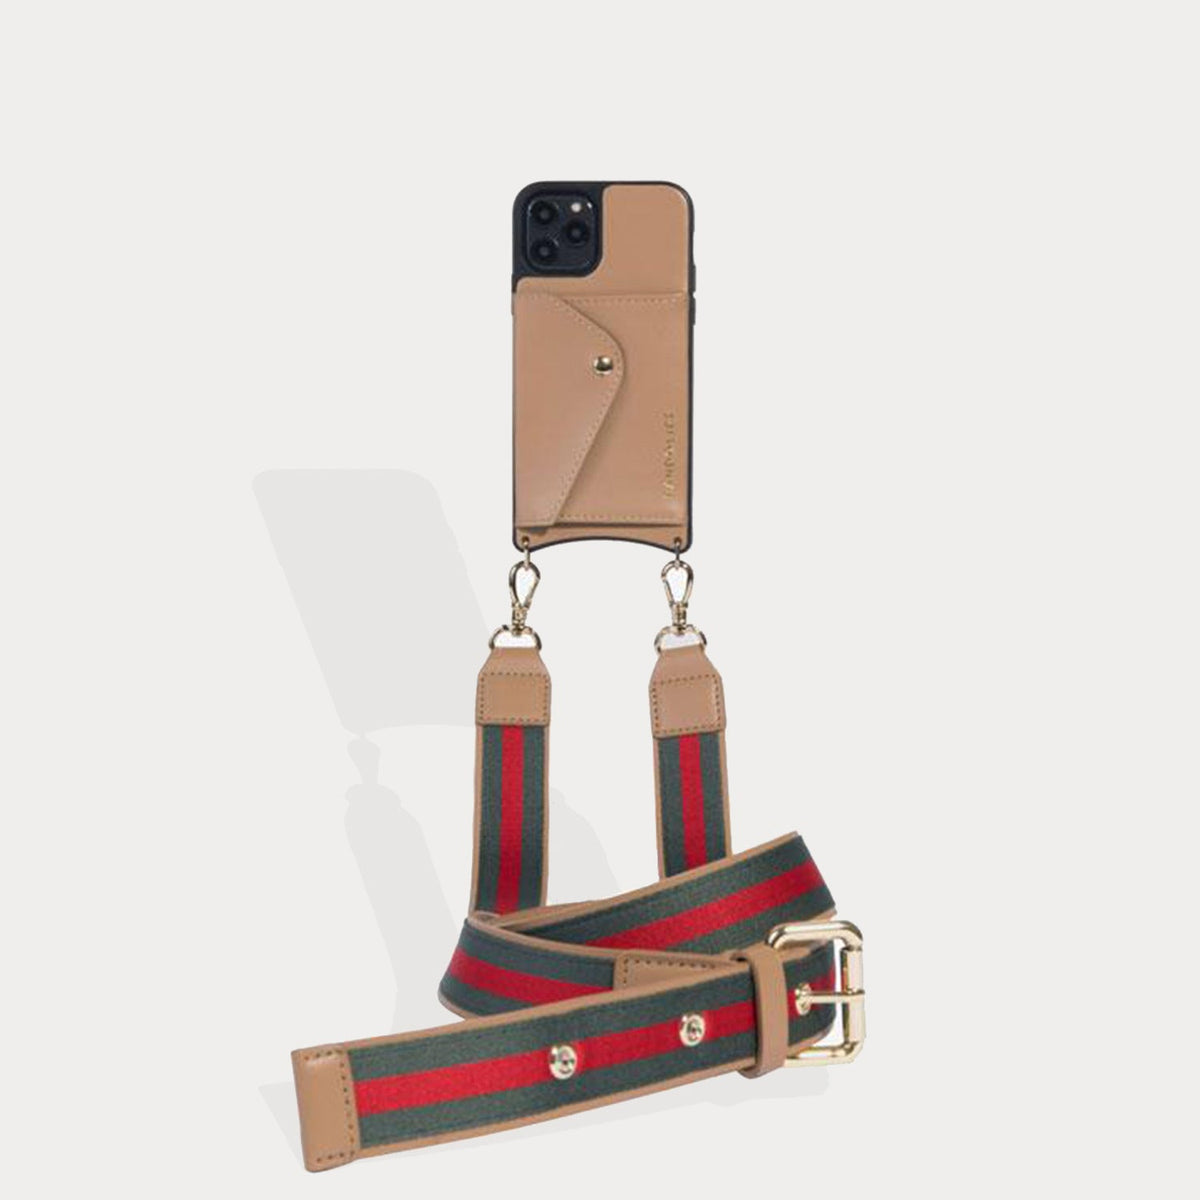 Gucci iPhone Case -  Norway